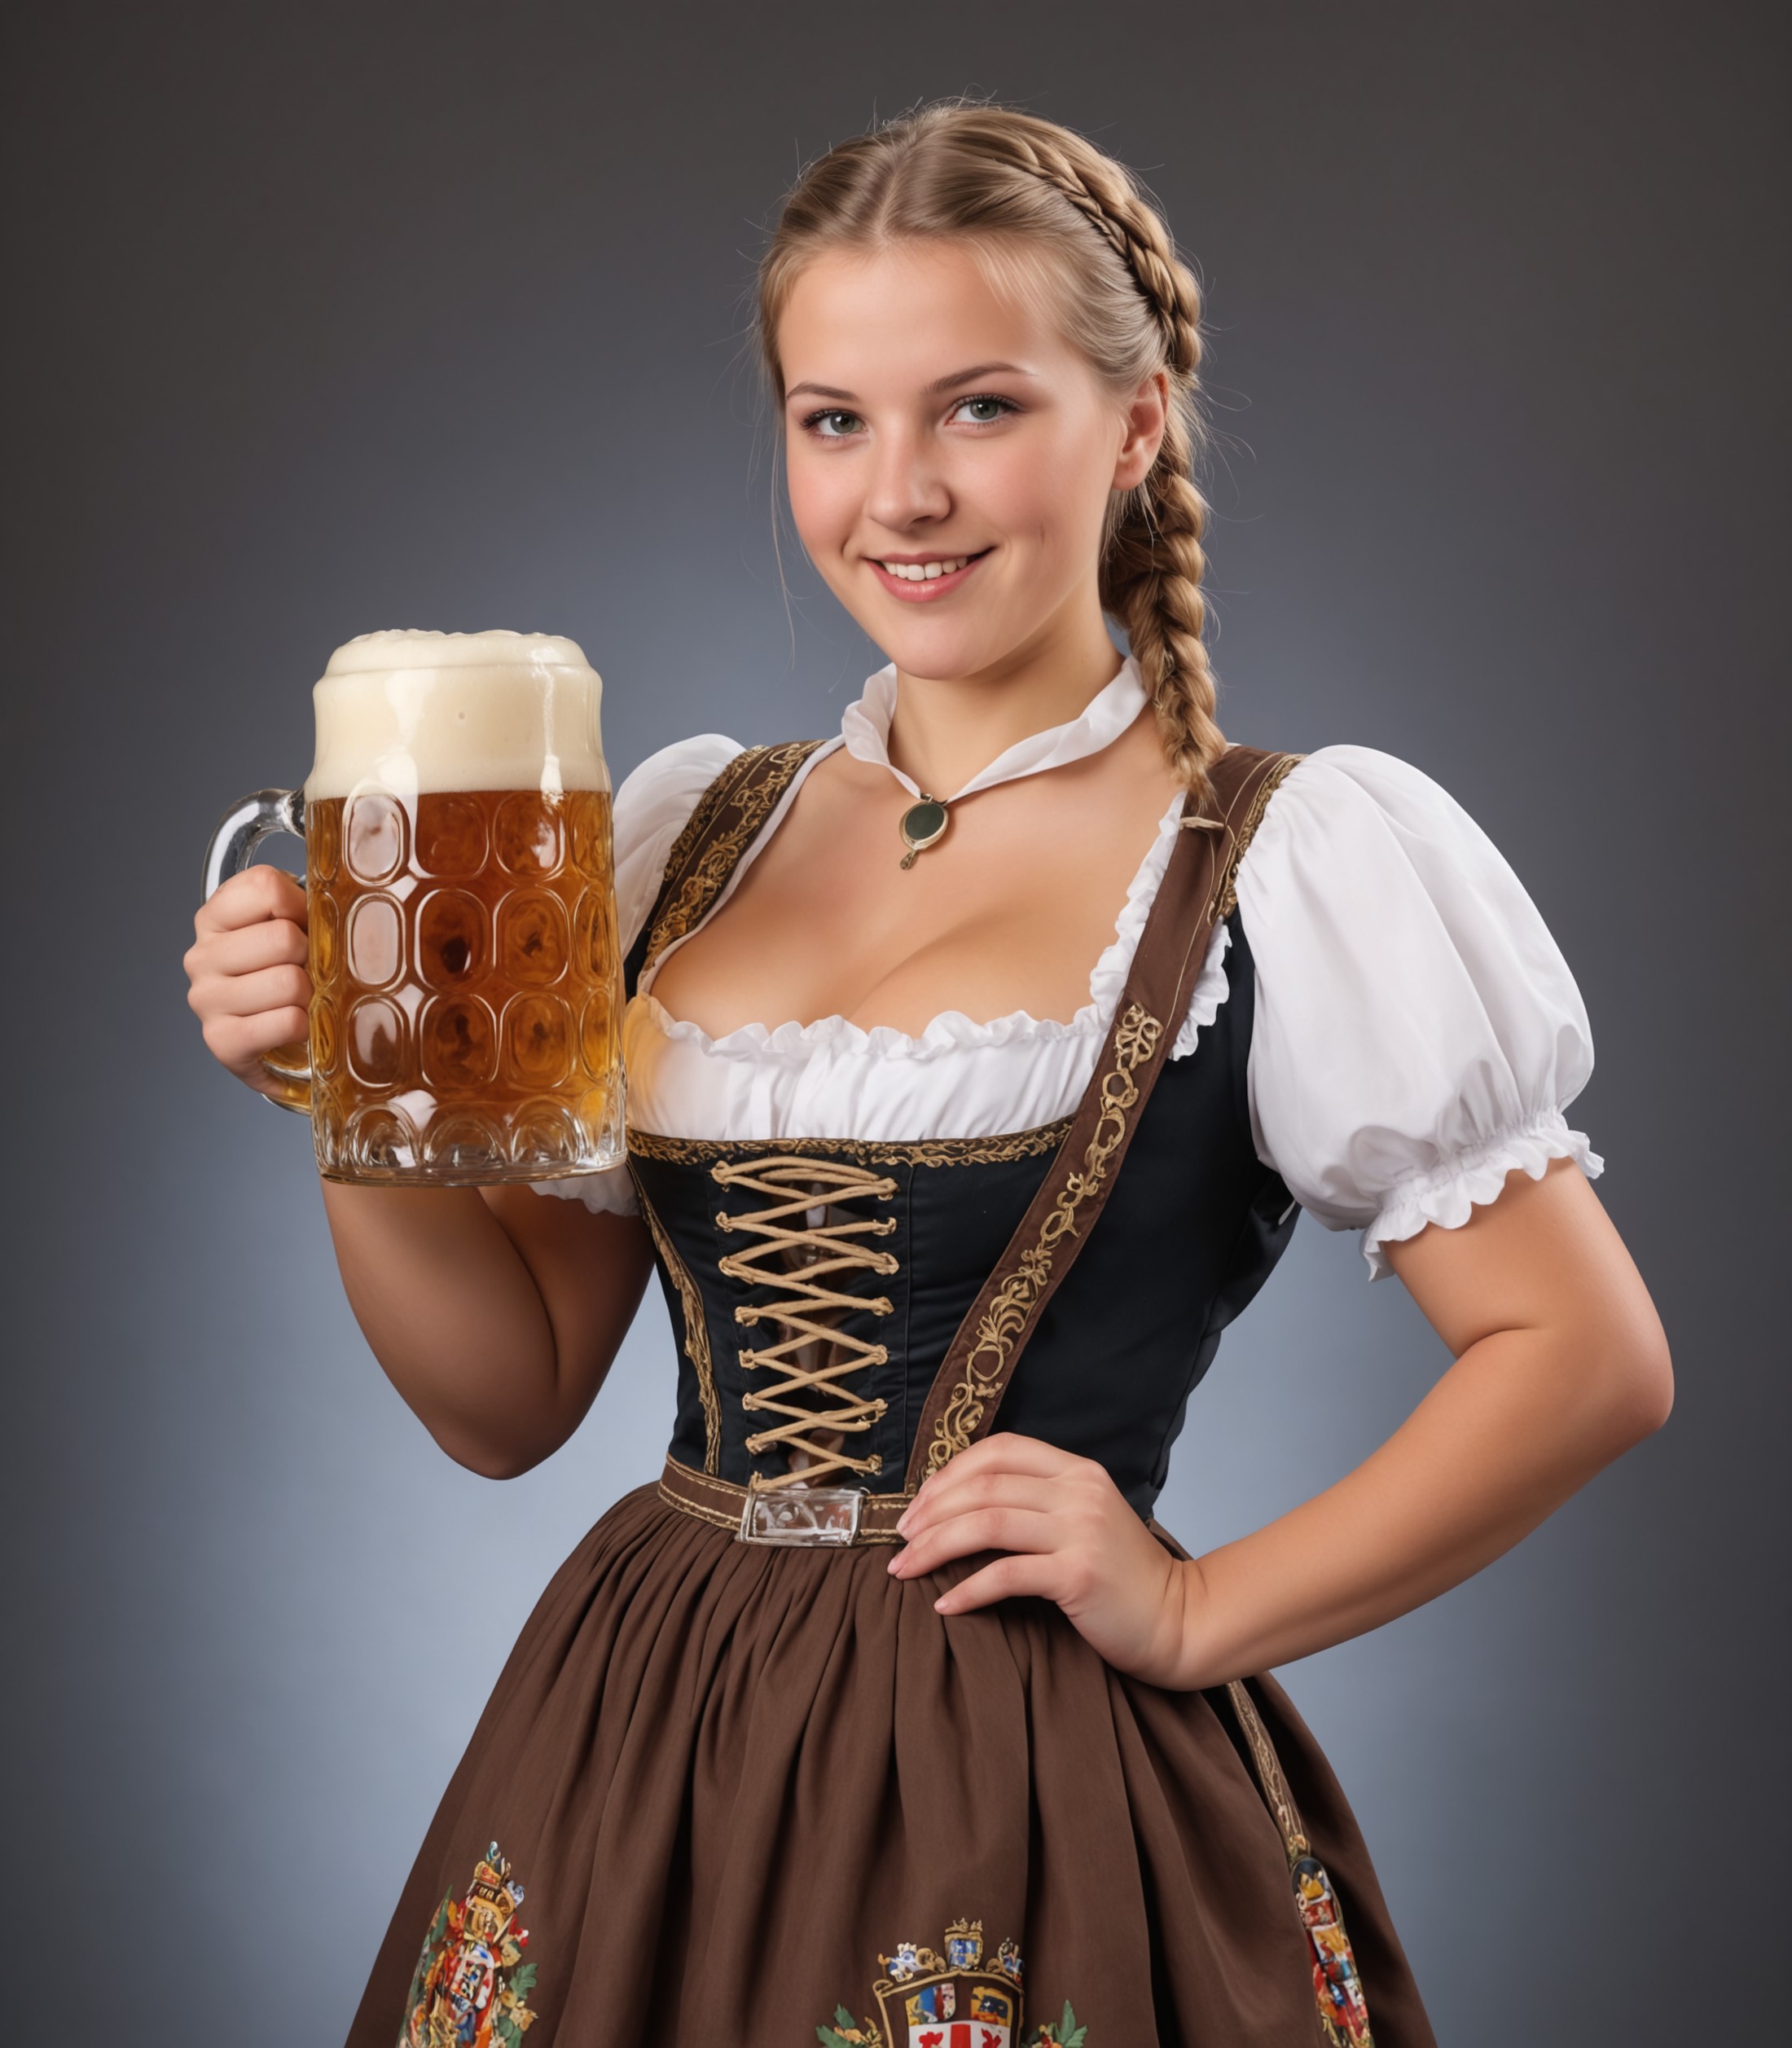 a german woman, 20 years old, wearing traditional bavarian dress, holding a giant beer mug